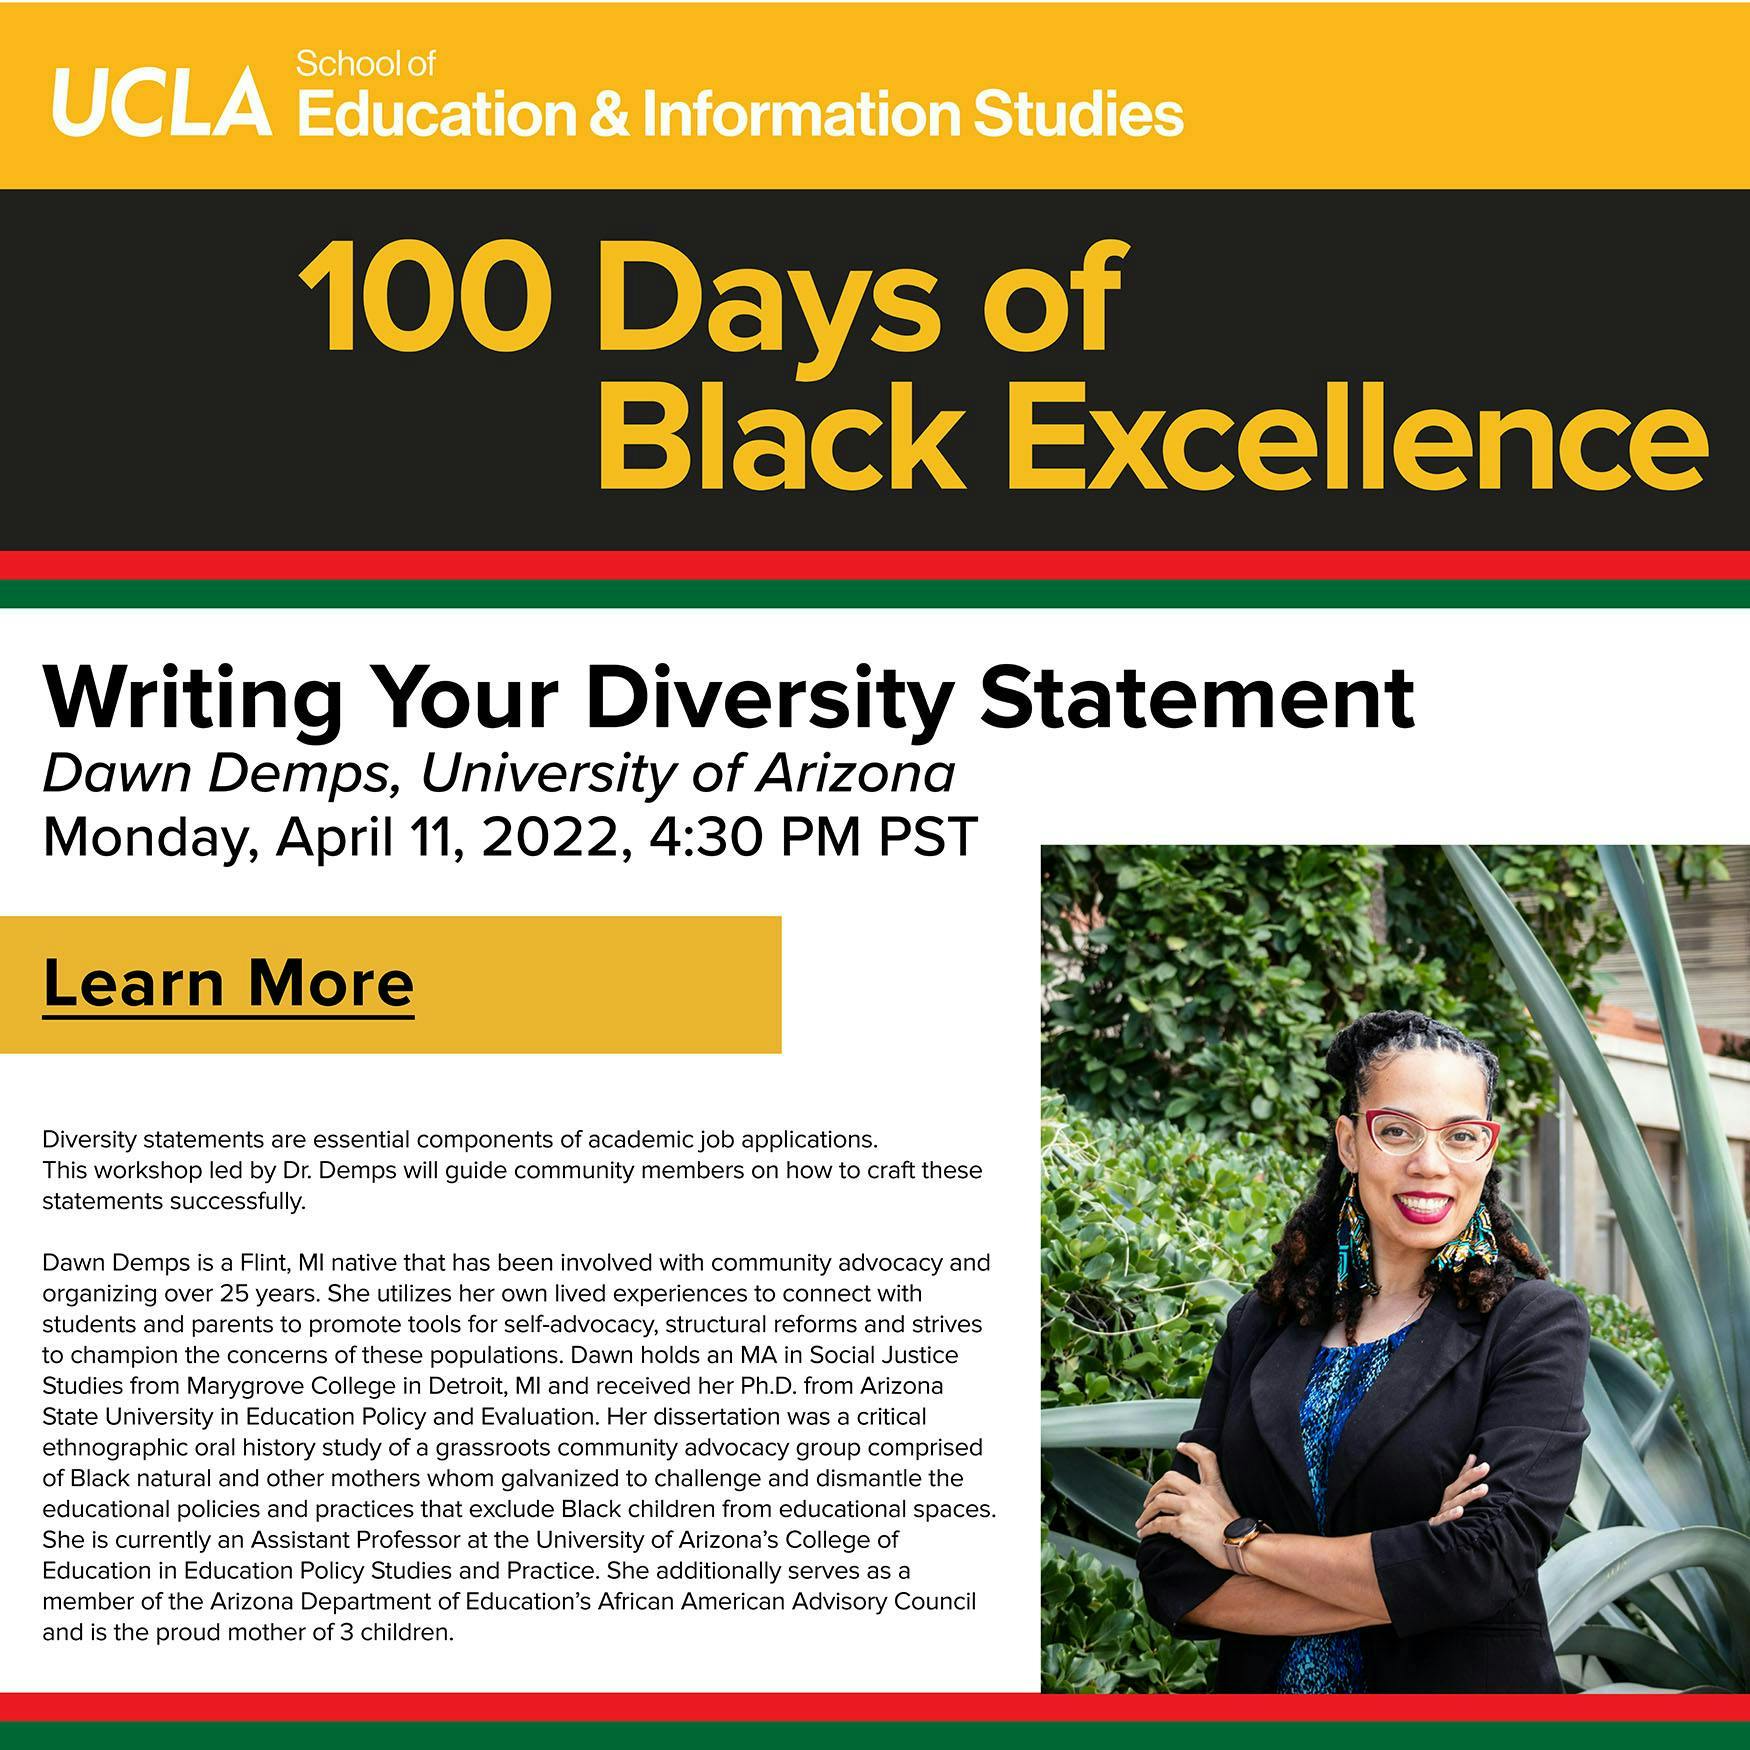 Flyer for Writing Your Diversity Statement